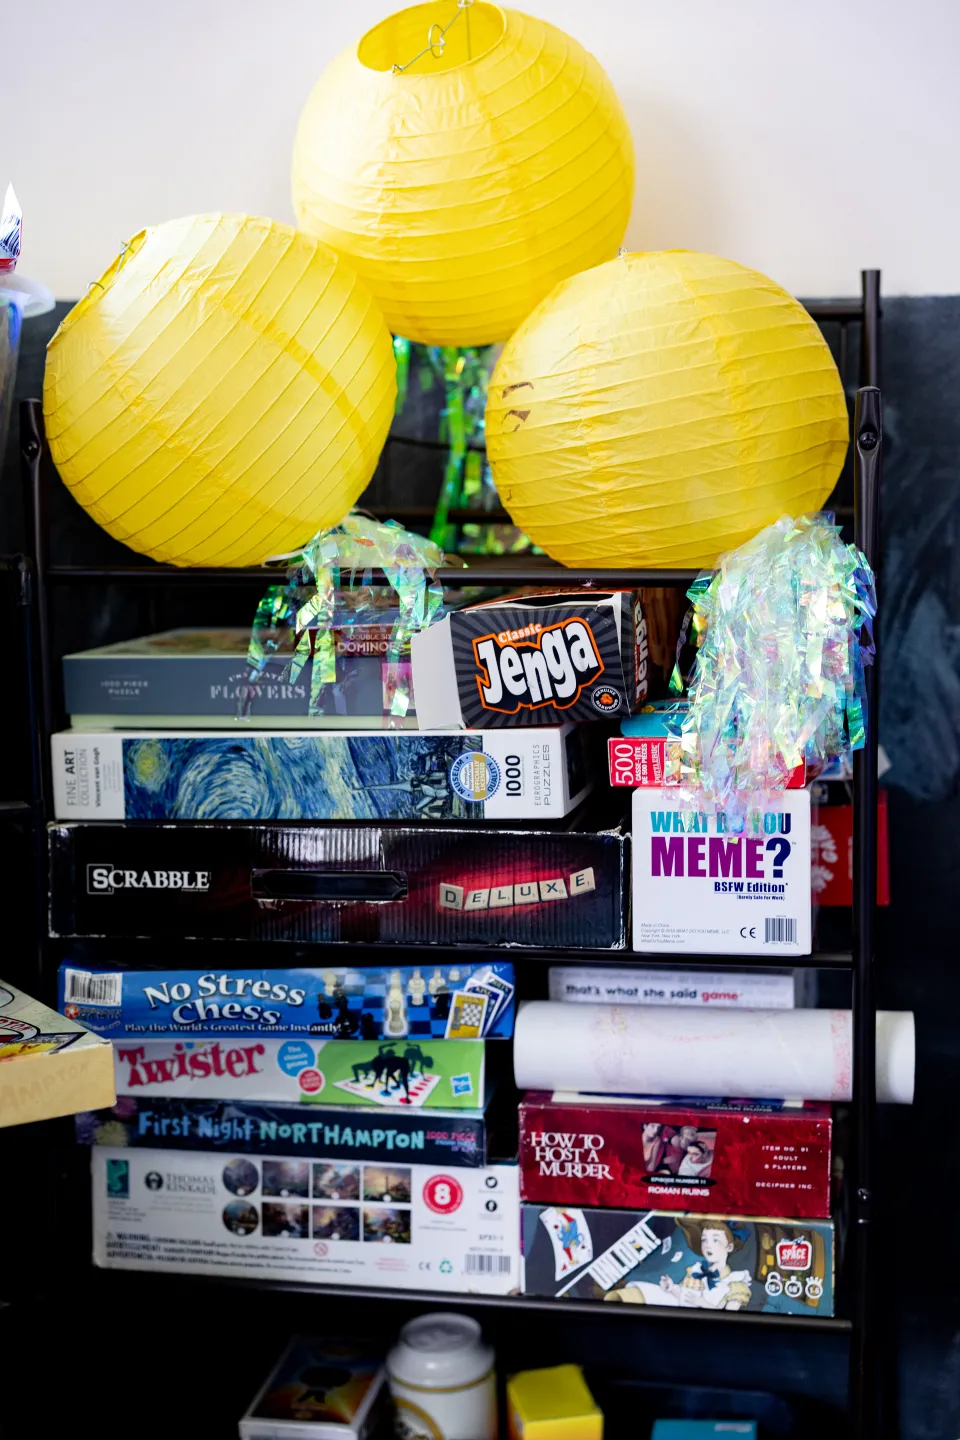 Board games, yellow paper lanterns and other decorations at SmithCycle in Scales House basement